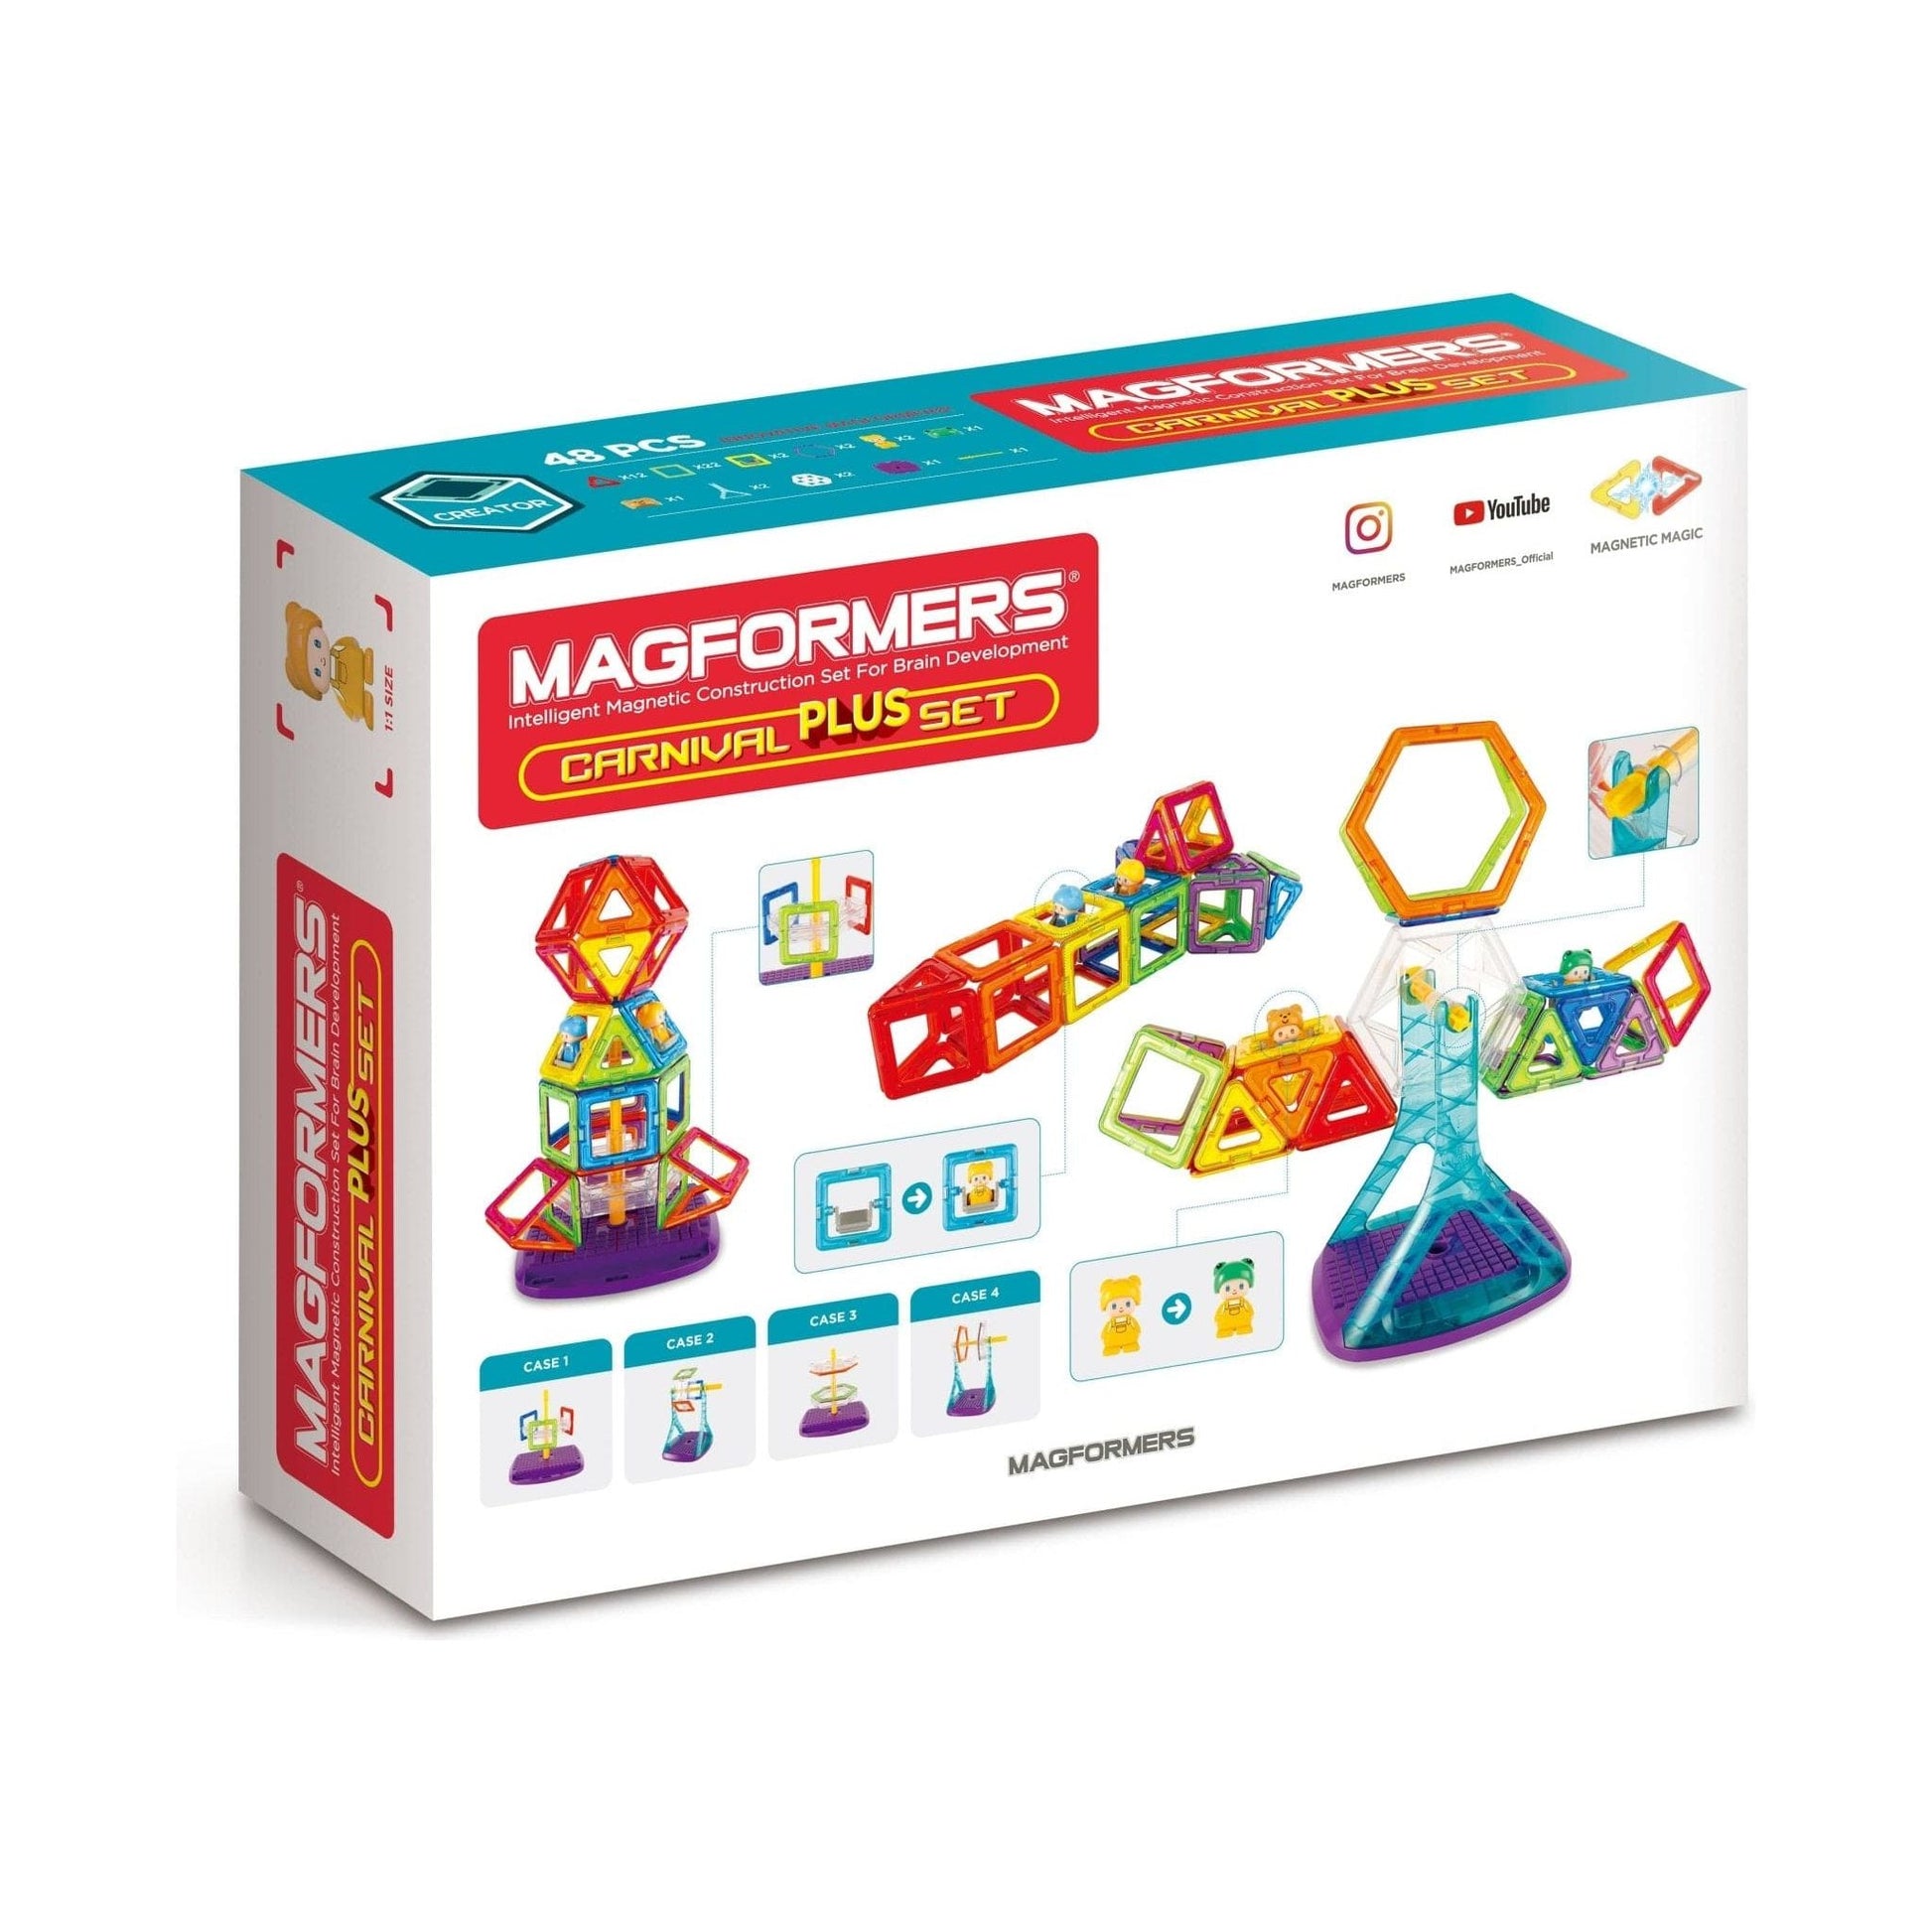 Magformers Construction Toys Carnival Plus Set  back of box